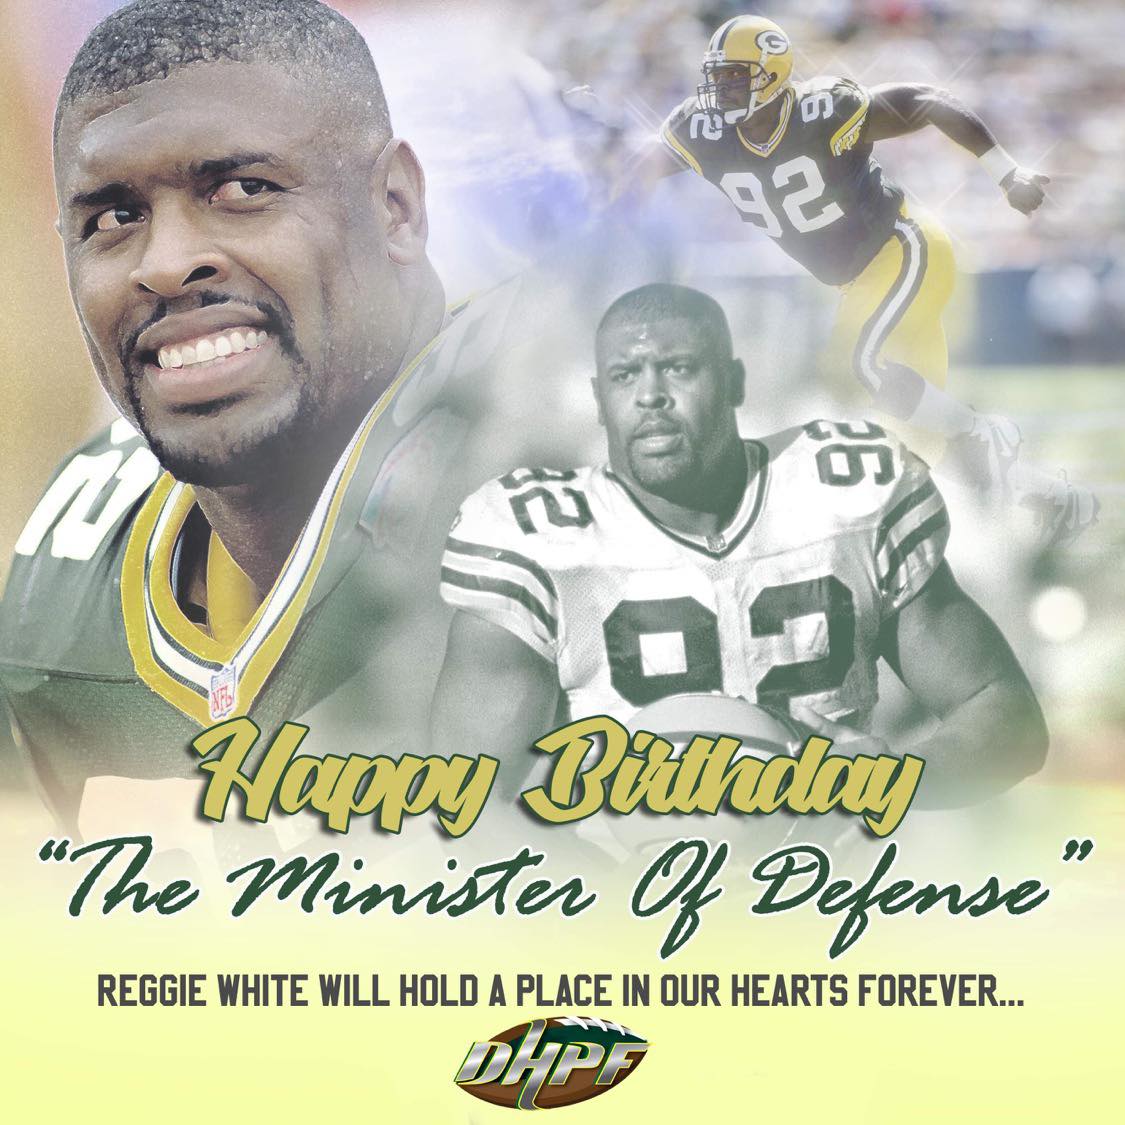 Happy heavenly birthday to Reggie White AKA the minister of defense and of course Reggie Clause. 